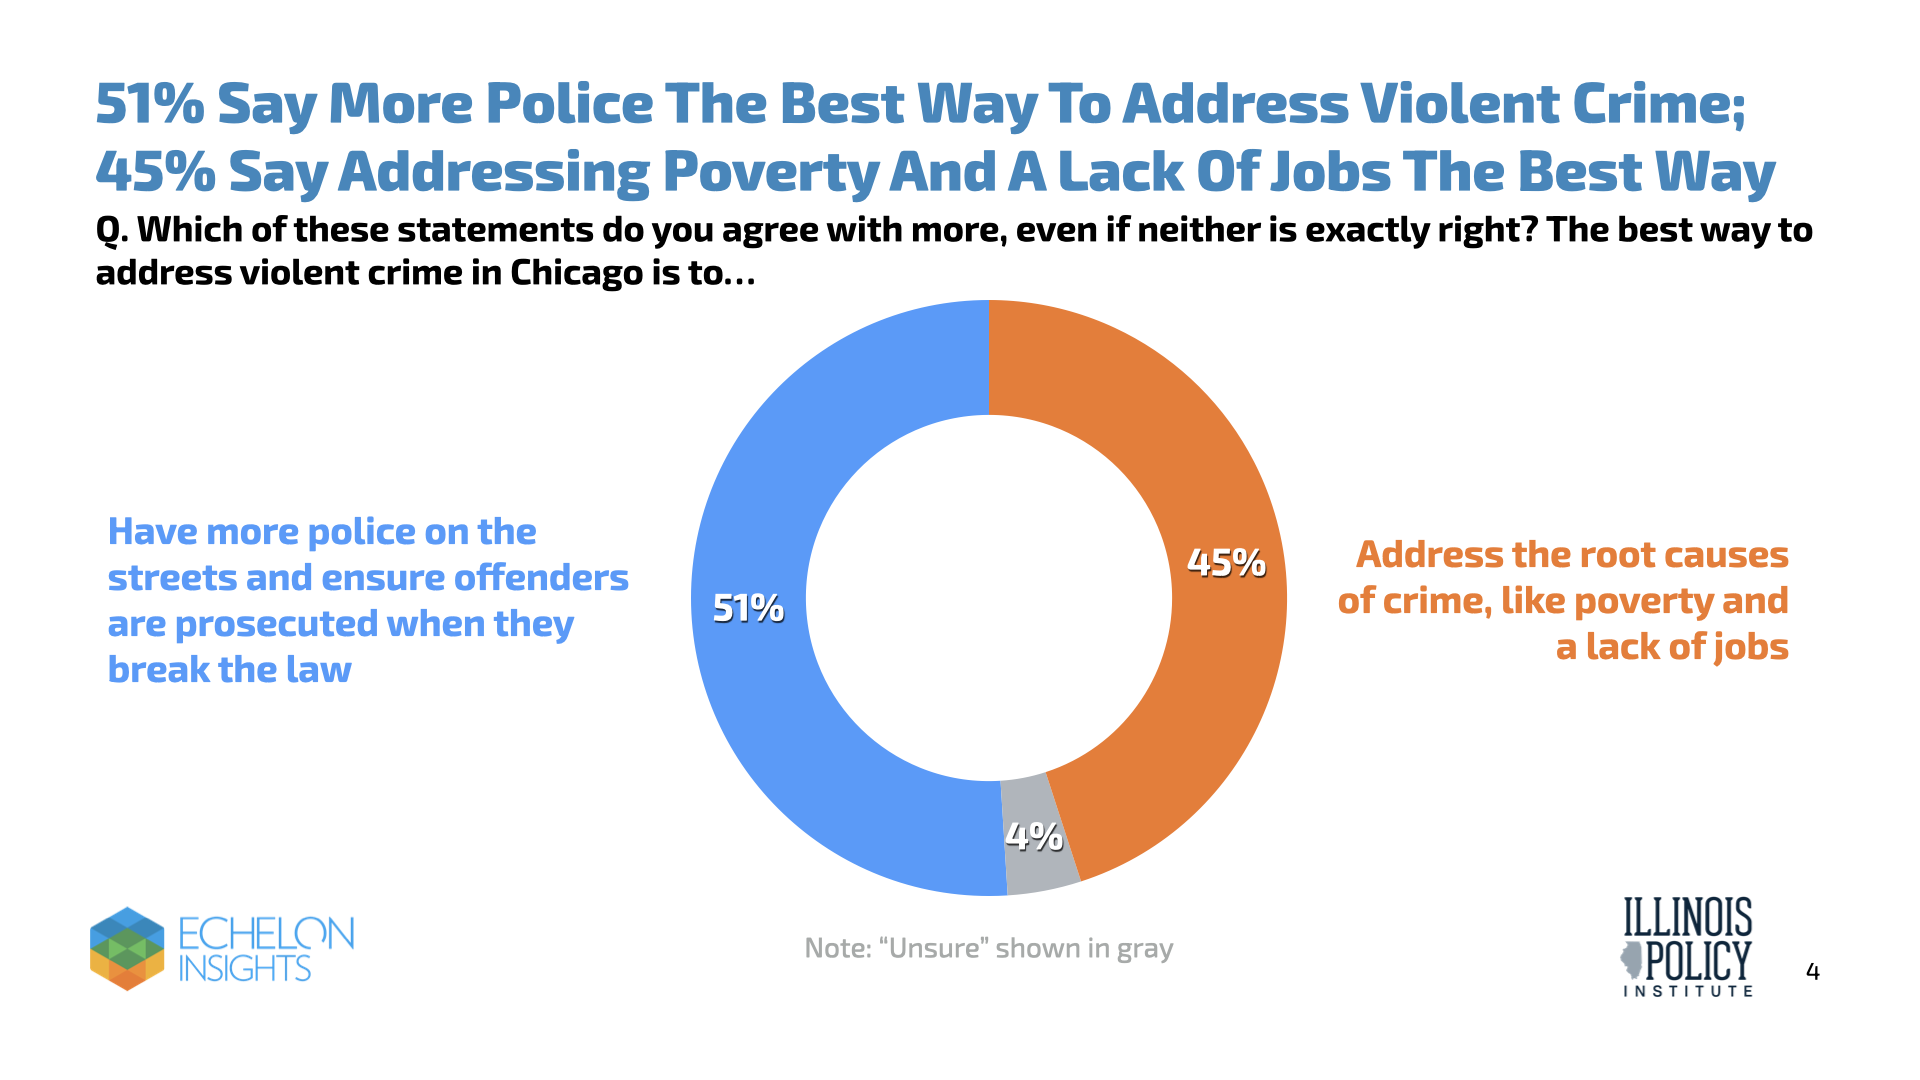 51% say more police the best way to address violent crime; 45% say addressing poverty and lack of jobs the best way